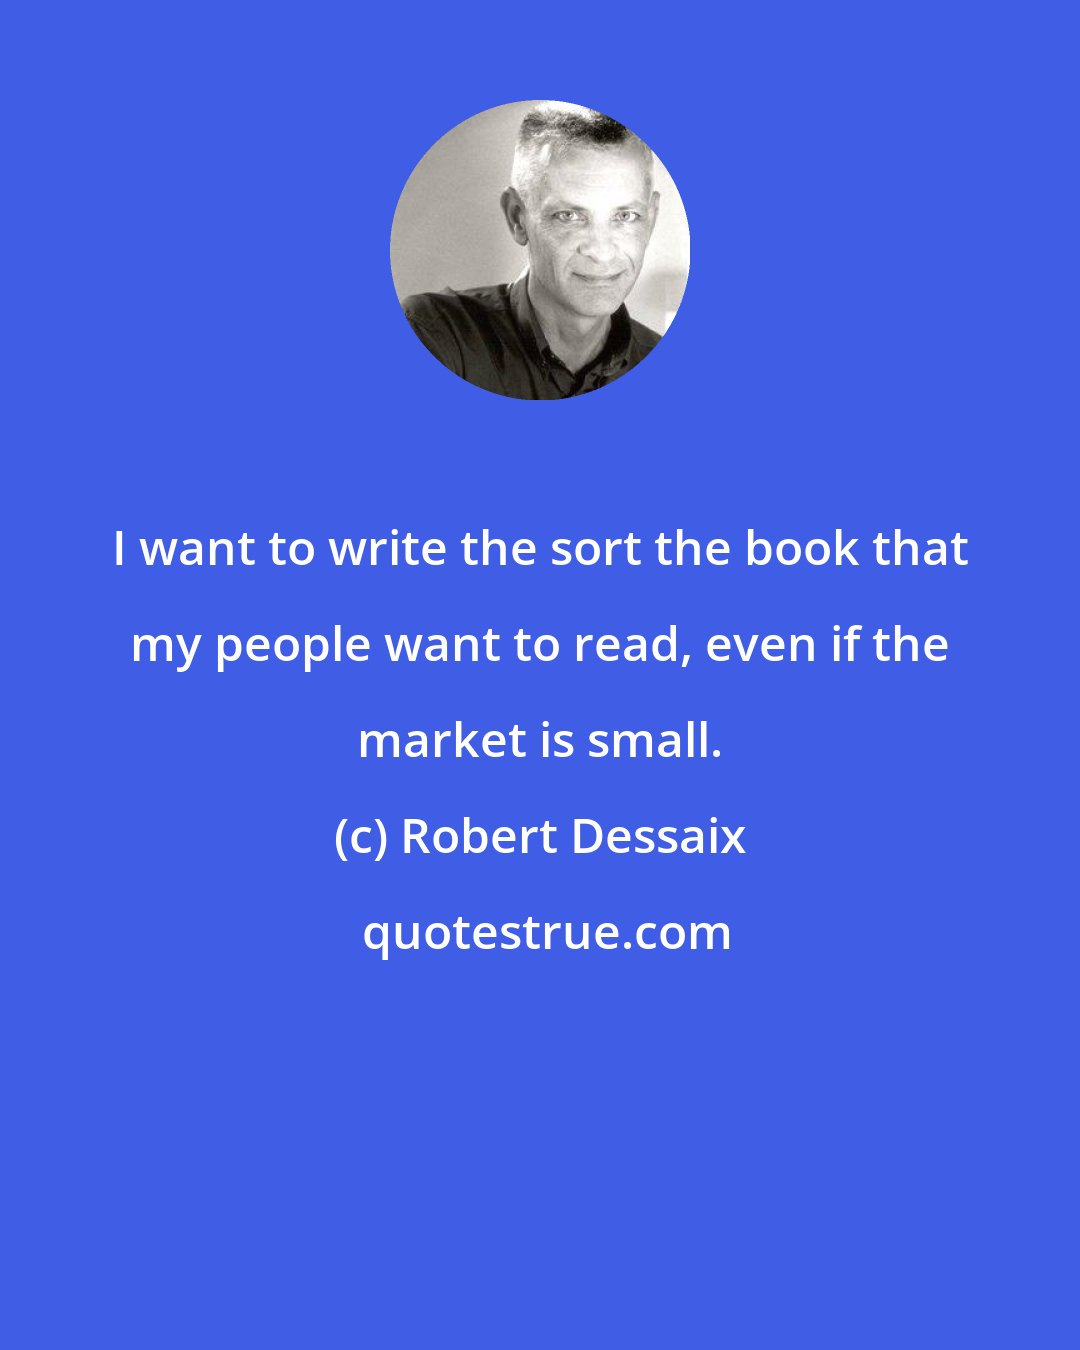 Robert Dessaix: I want to write the sort the book that my people want to read, even if the market is small.